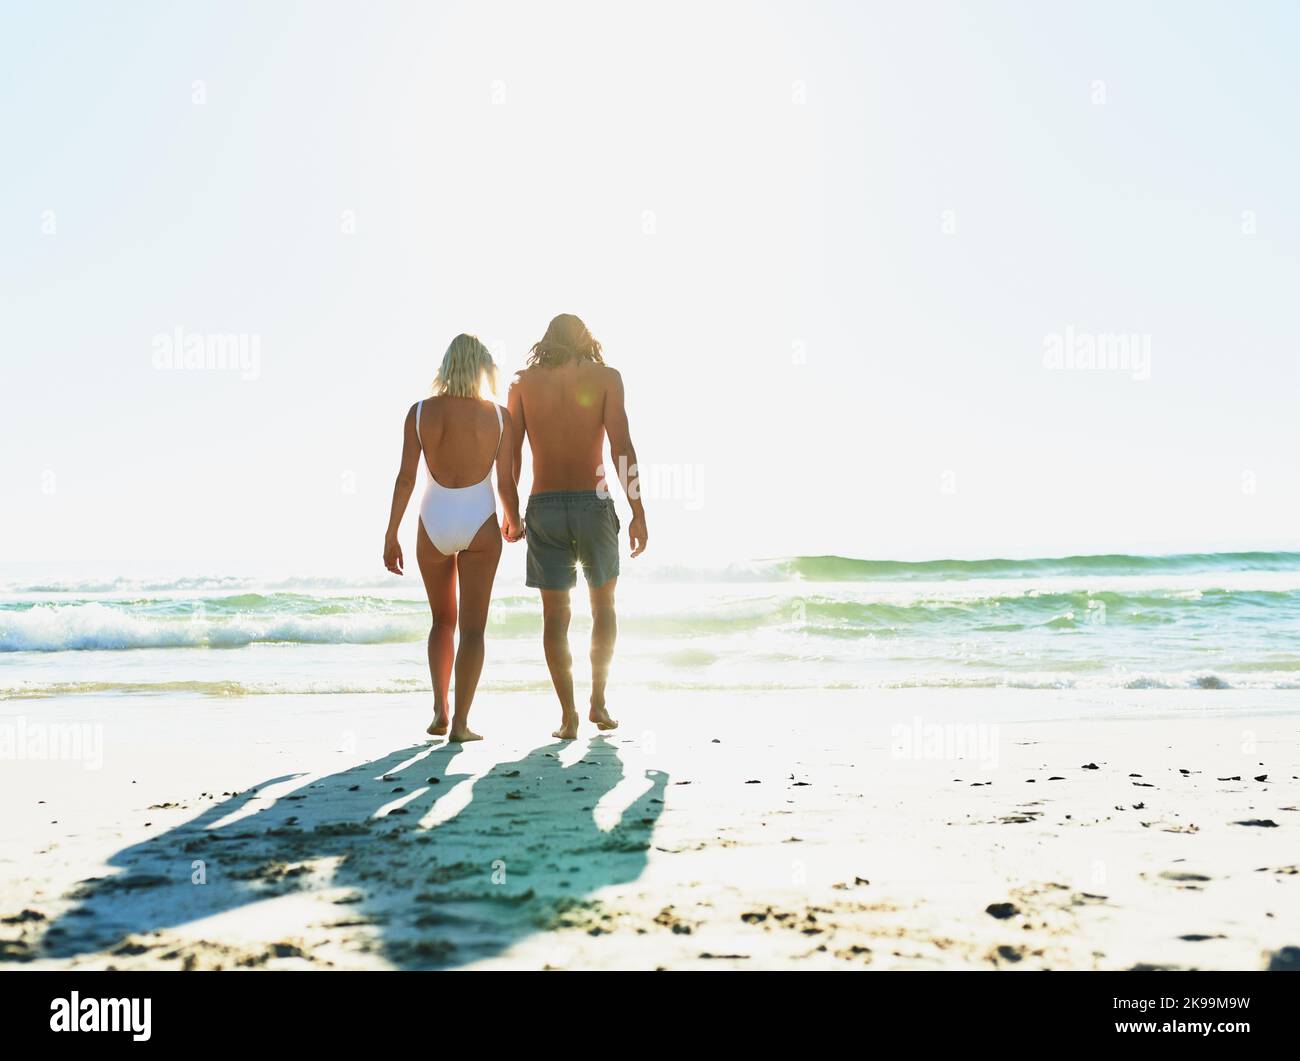 Go out and find some beauty in the world. Rearview shot of a young couple enjoying some quality time together at the beach. Stock Photo